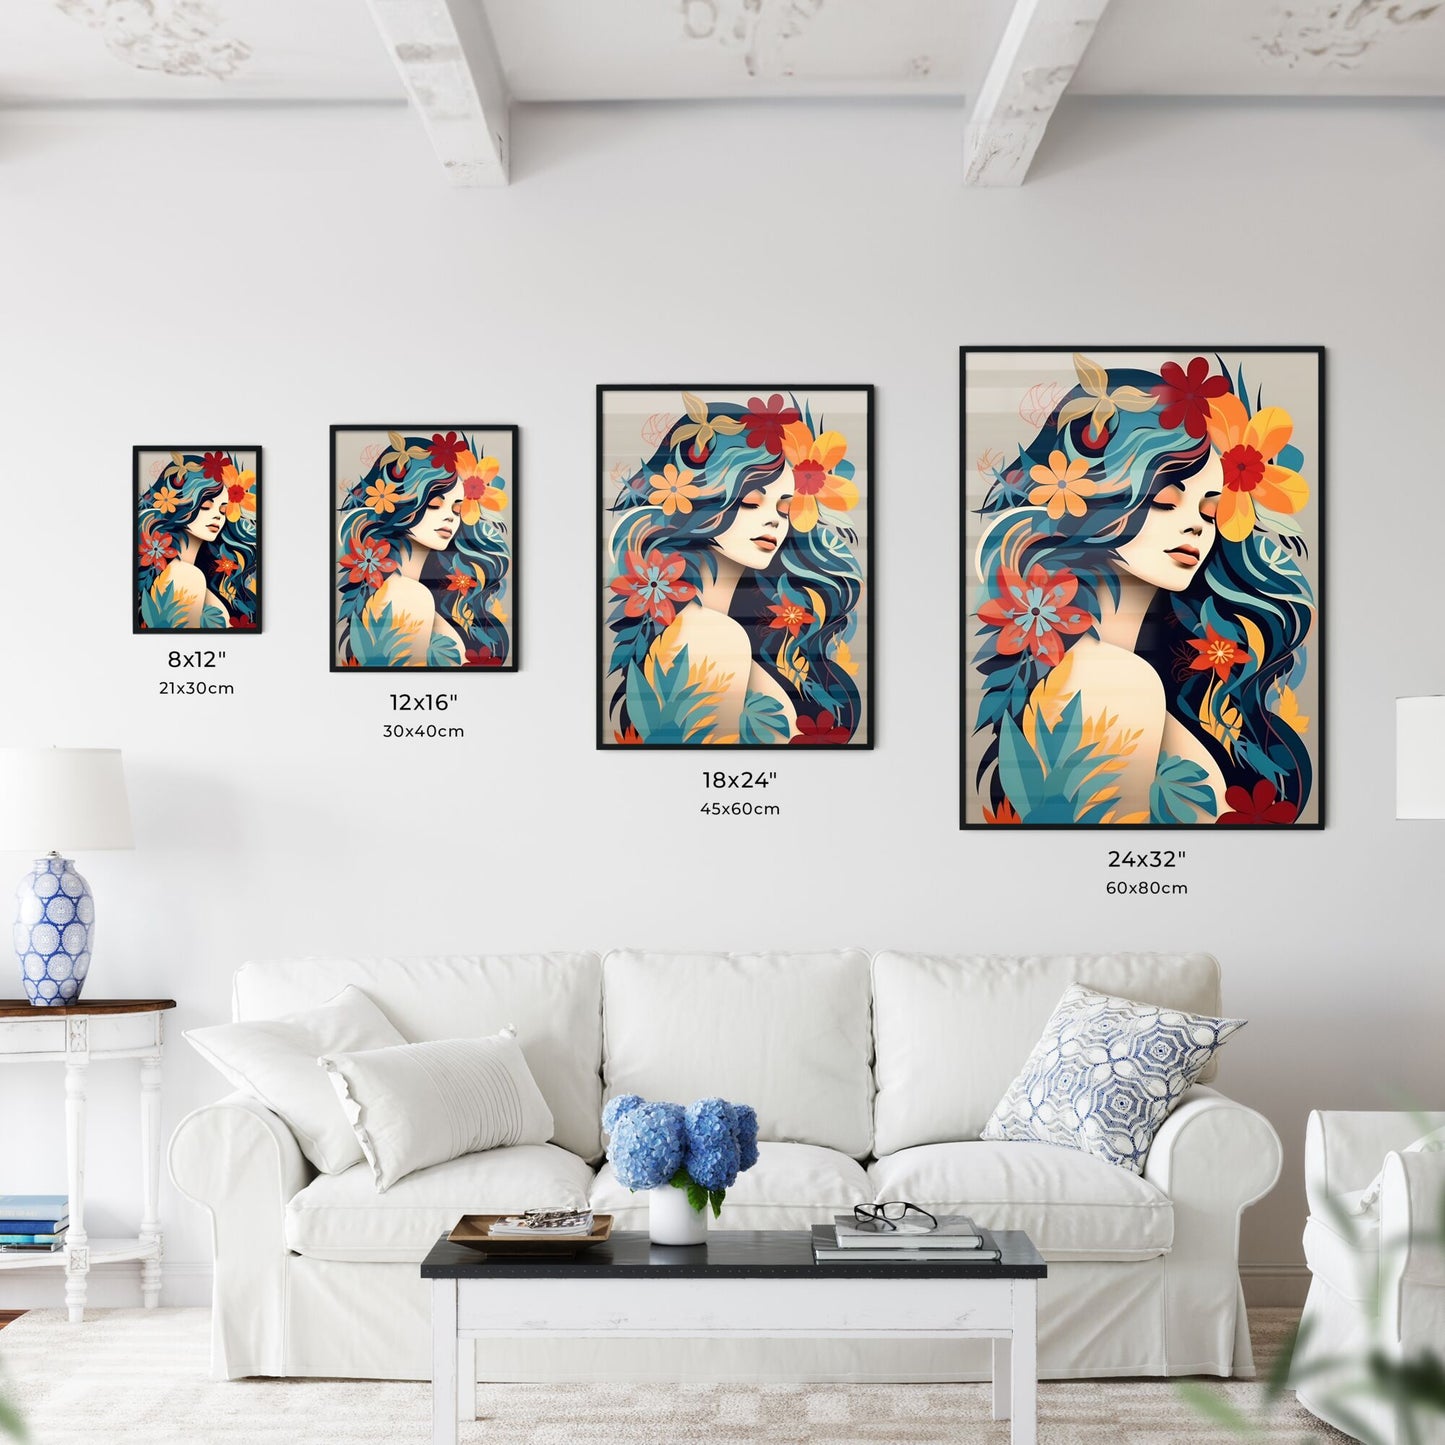 Woman With Flowers In Her Hair Art Print Default Title